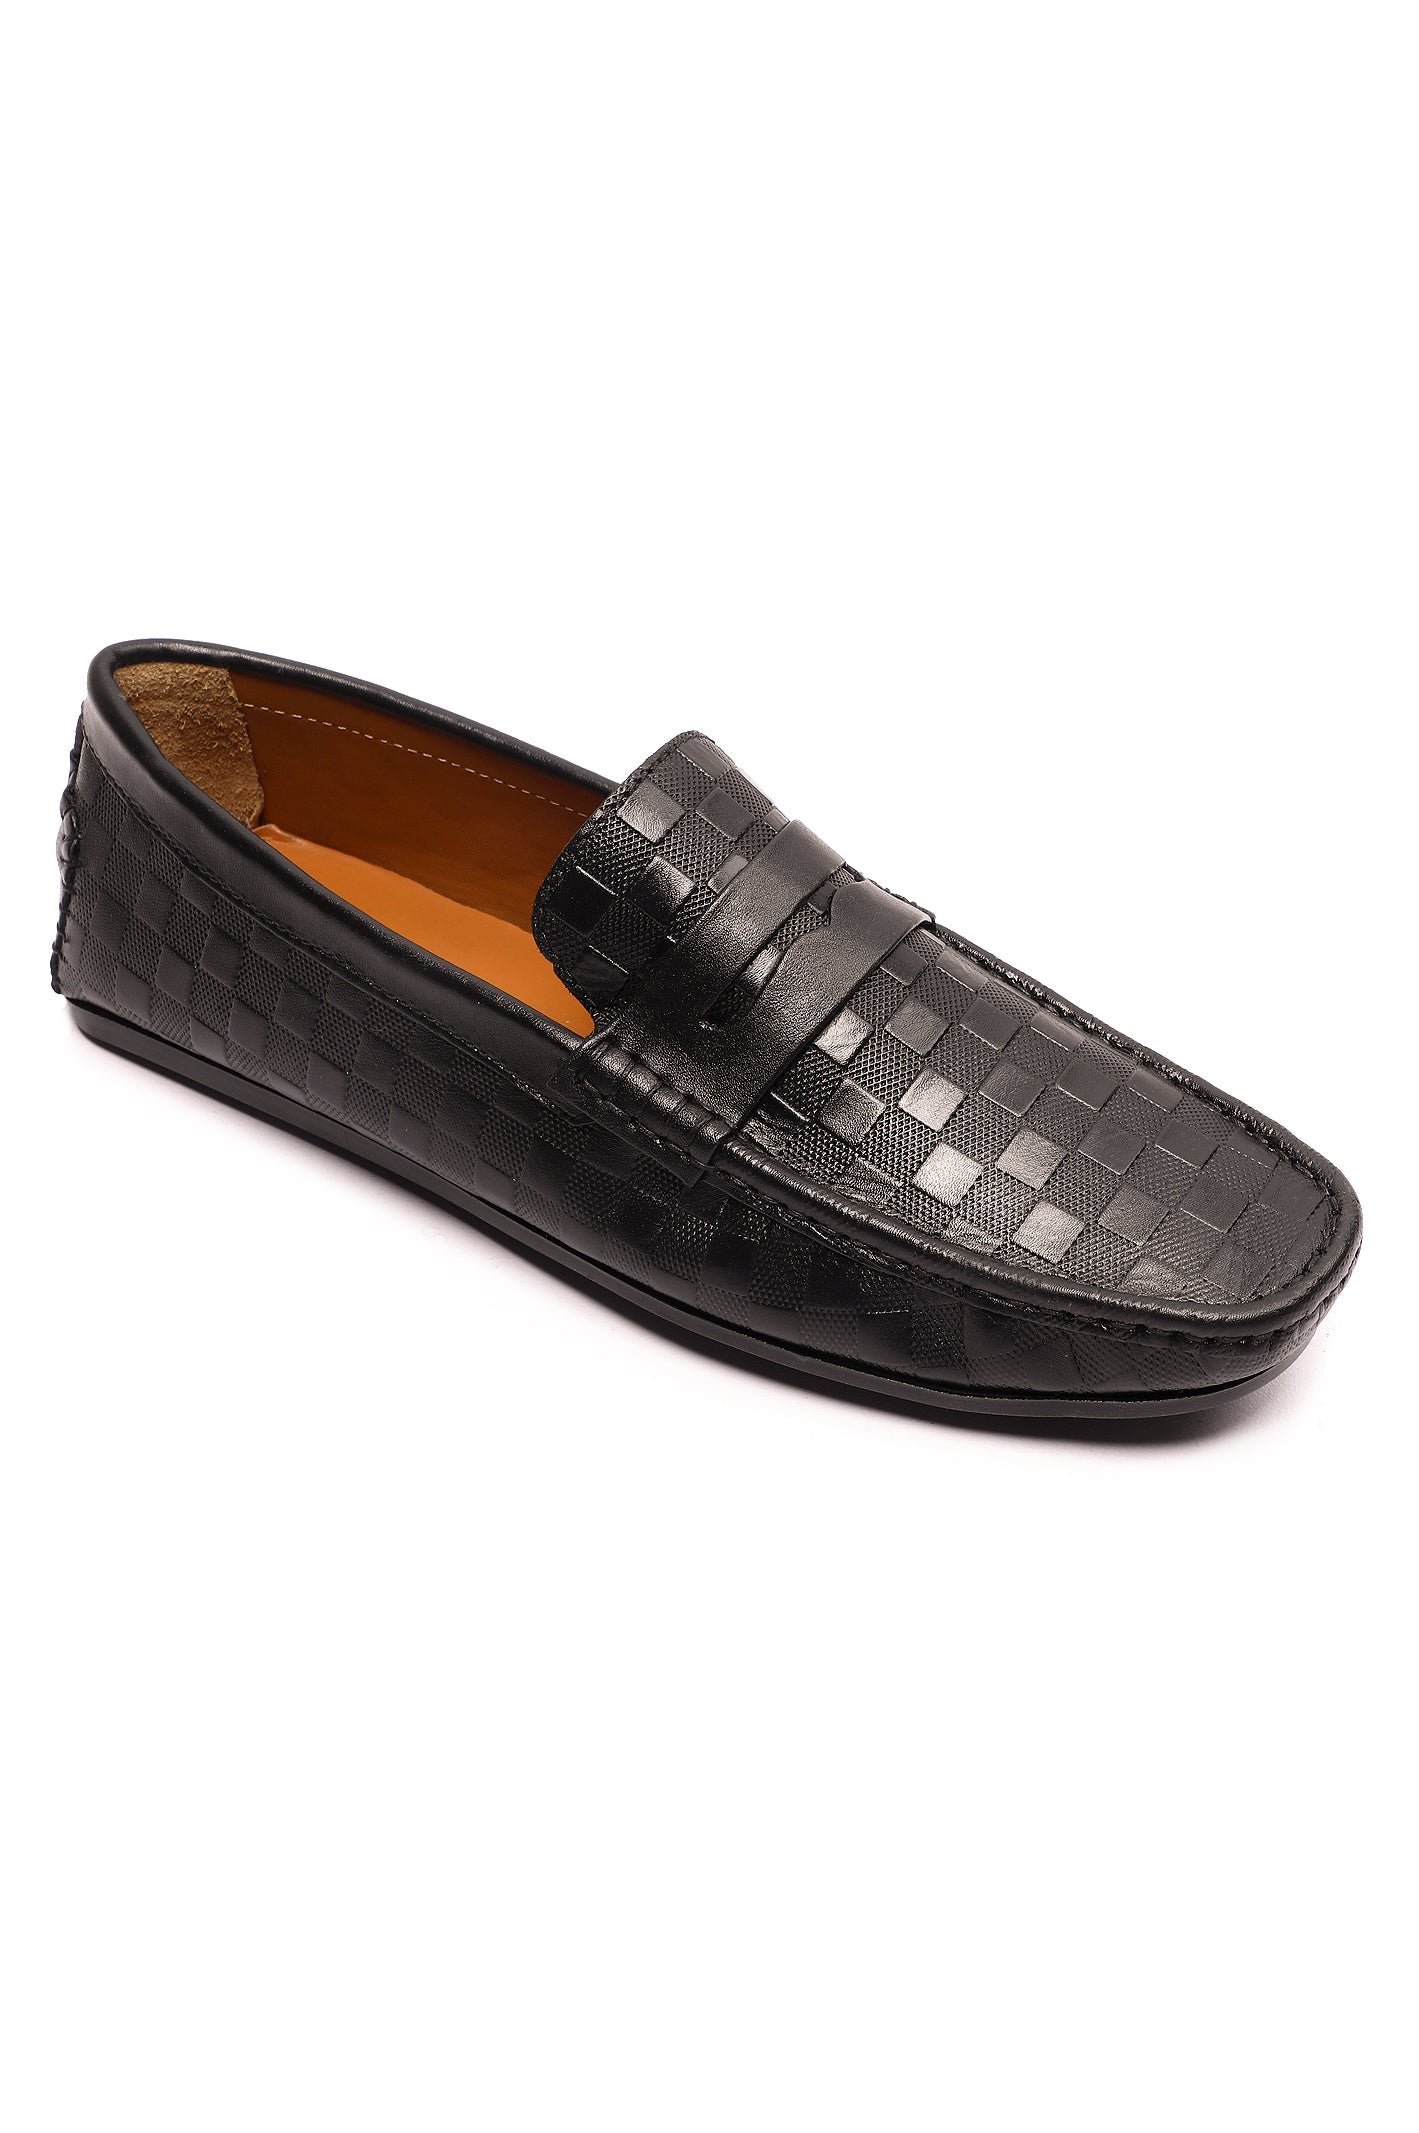 Casual Shoes For Men SKU: SMC-0096-COFFEE - Diners